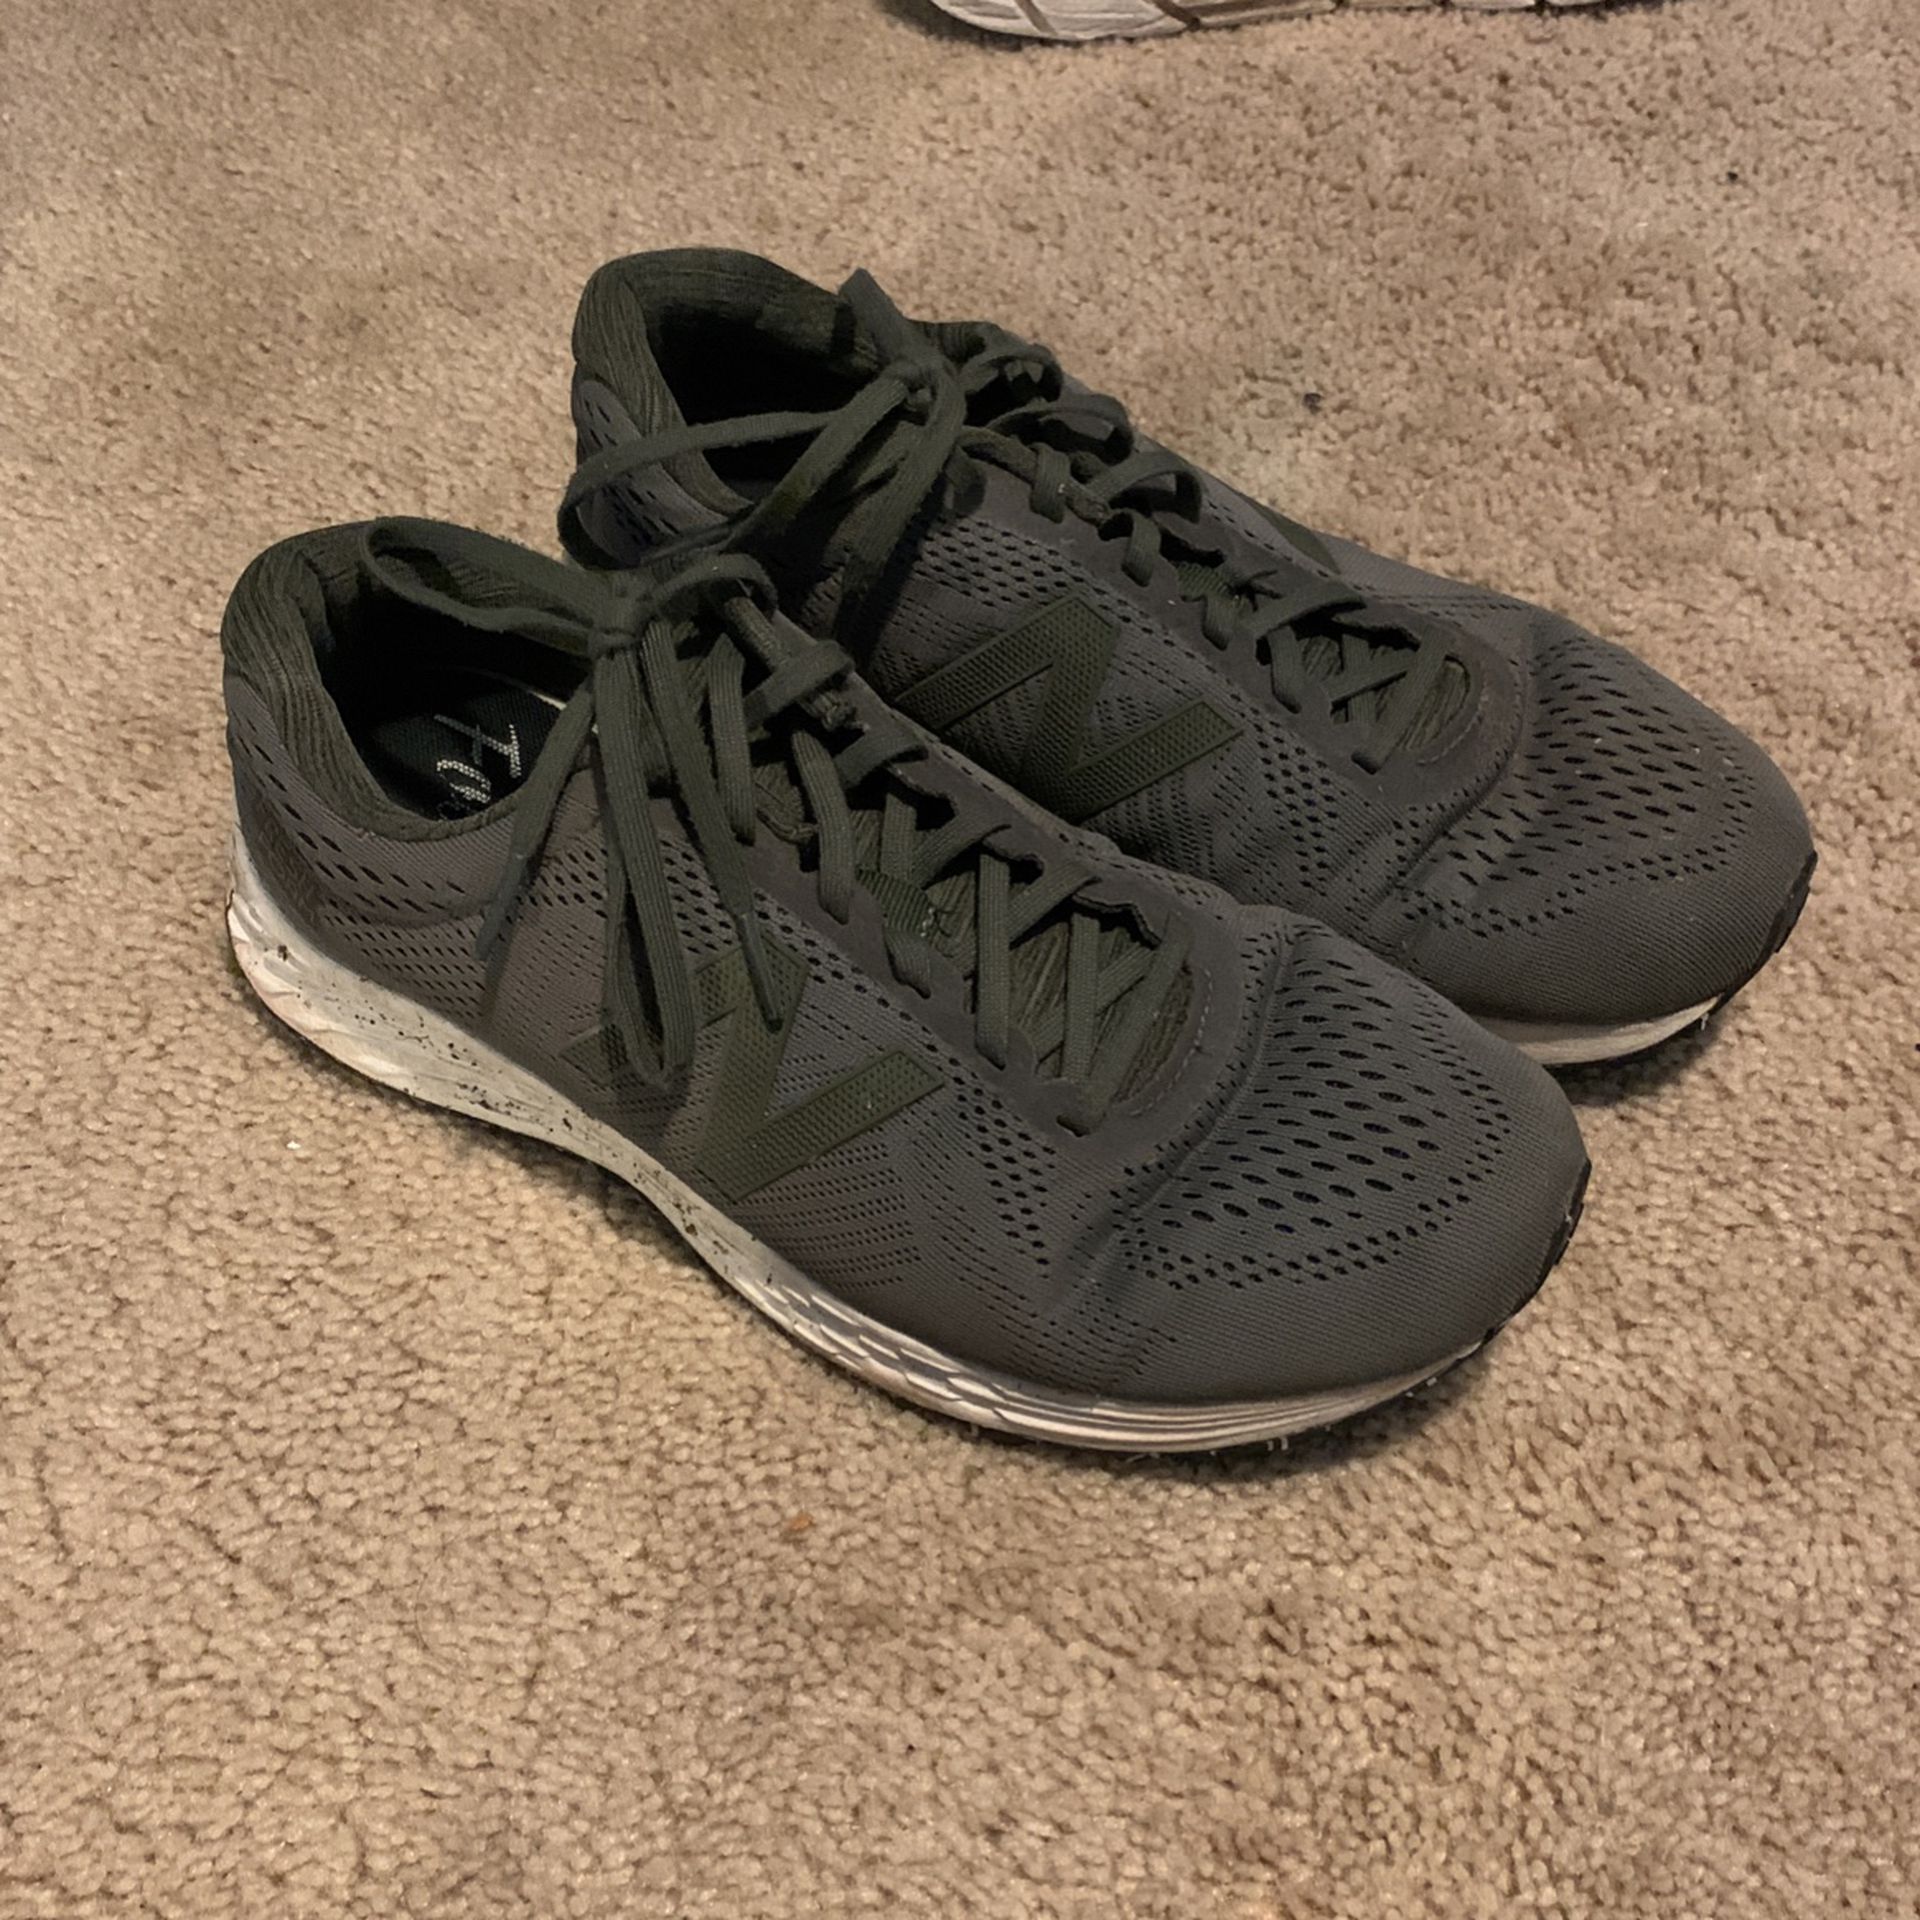 New Balance Running Shoes Size 8.5 